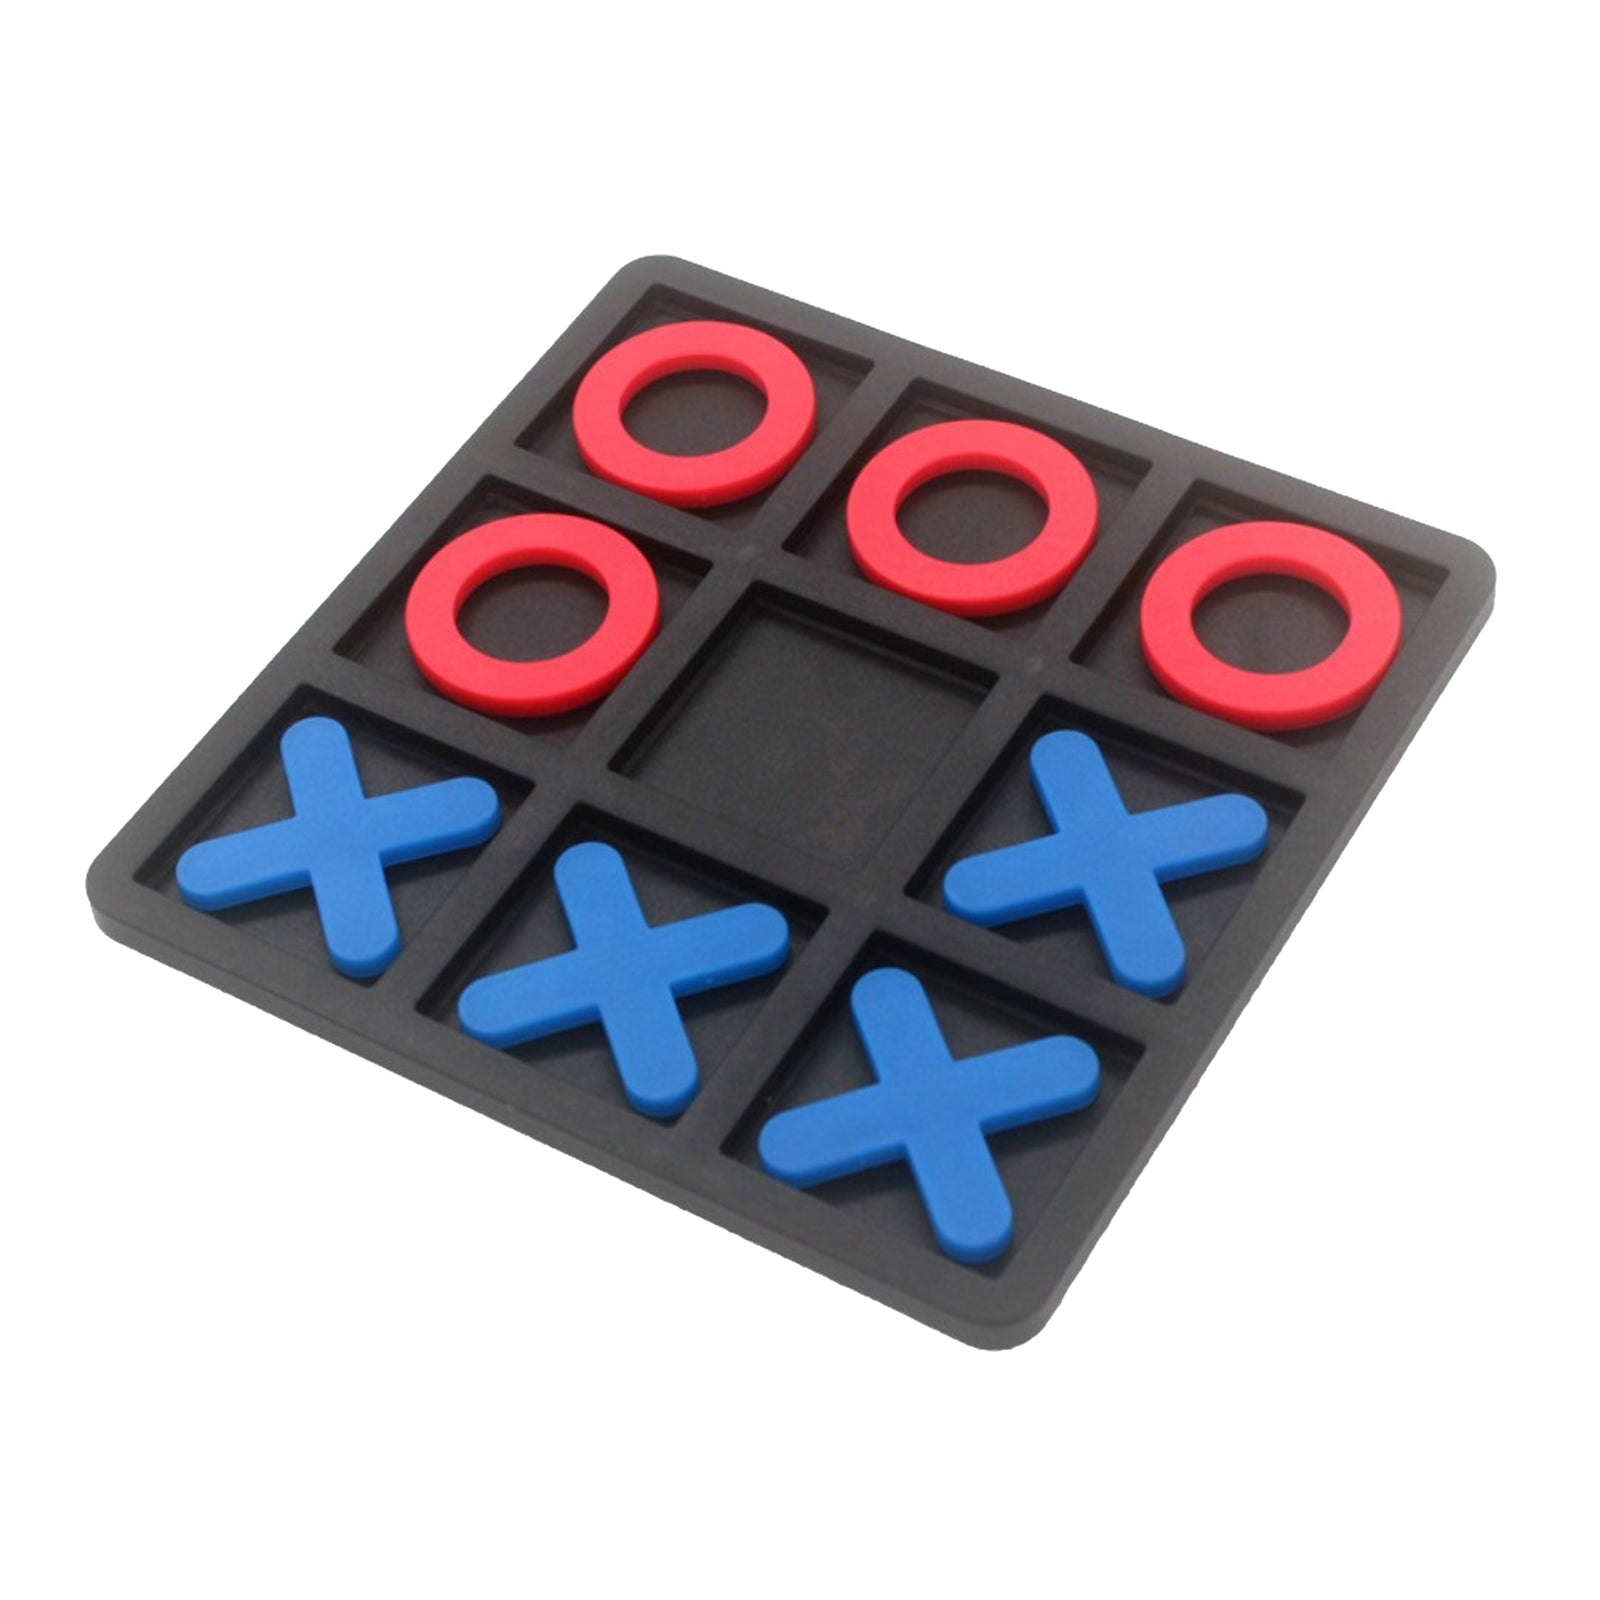 Mini Travel Games, Tic-Tac-Toe Game Puzzle Game Educational Toys For Kids